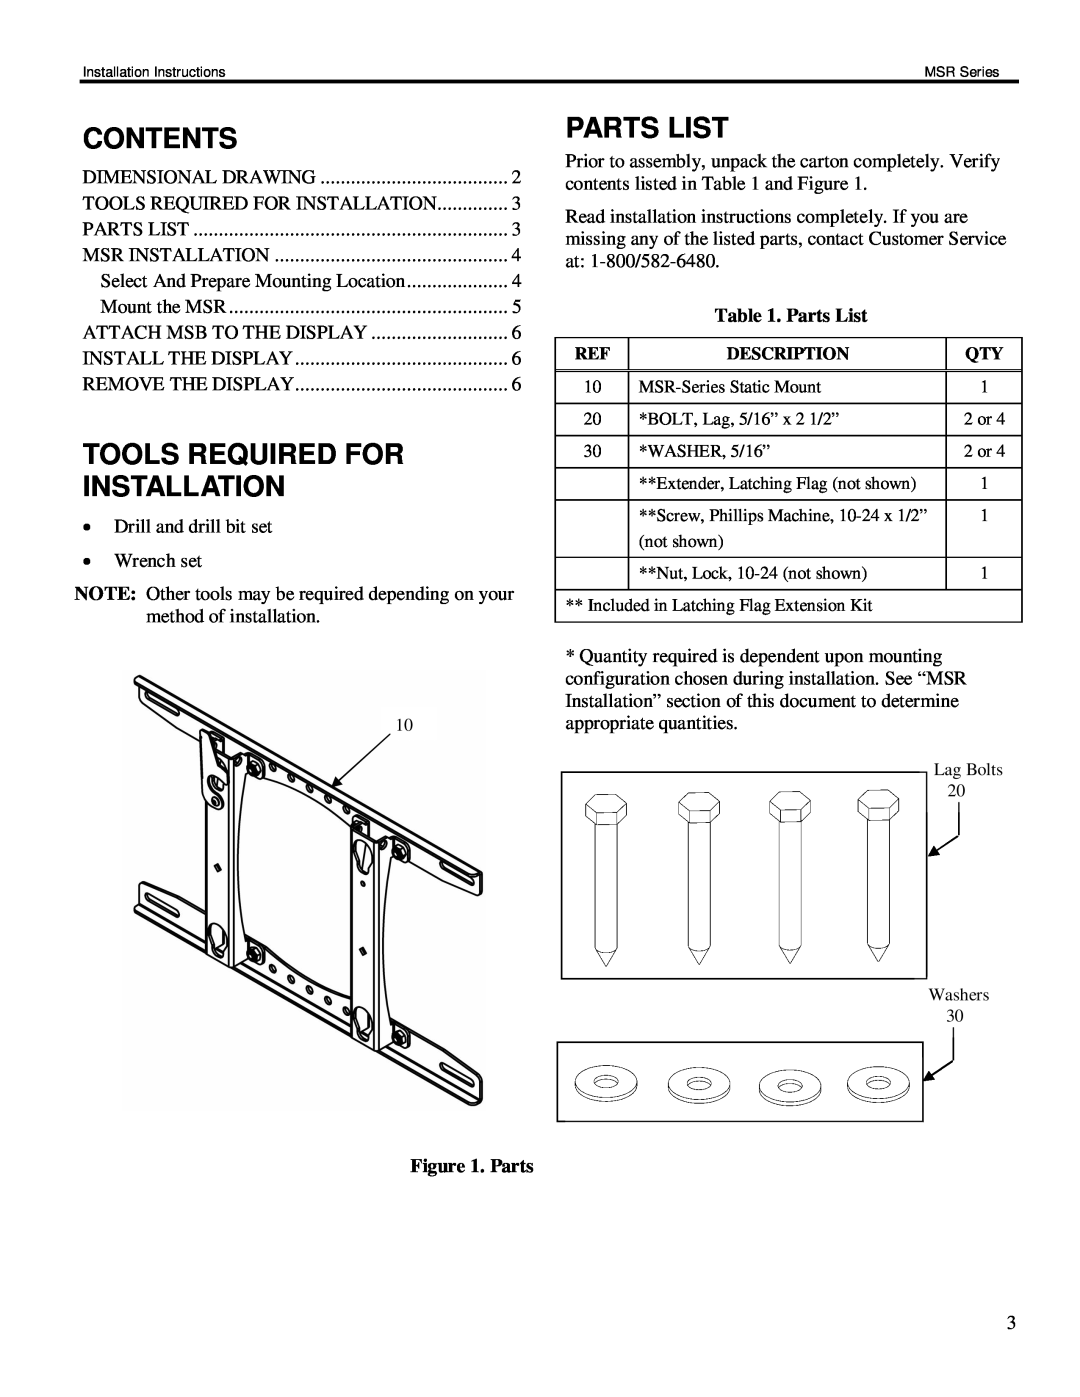 Chief Manufacturing MSR Series installation instructions Contents, Tools Required For Installation, Parts List 